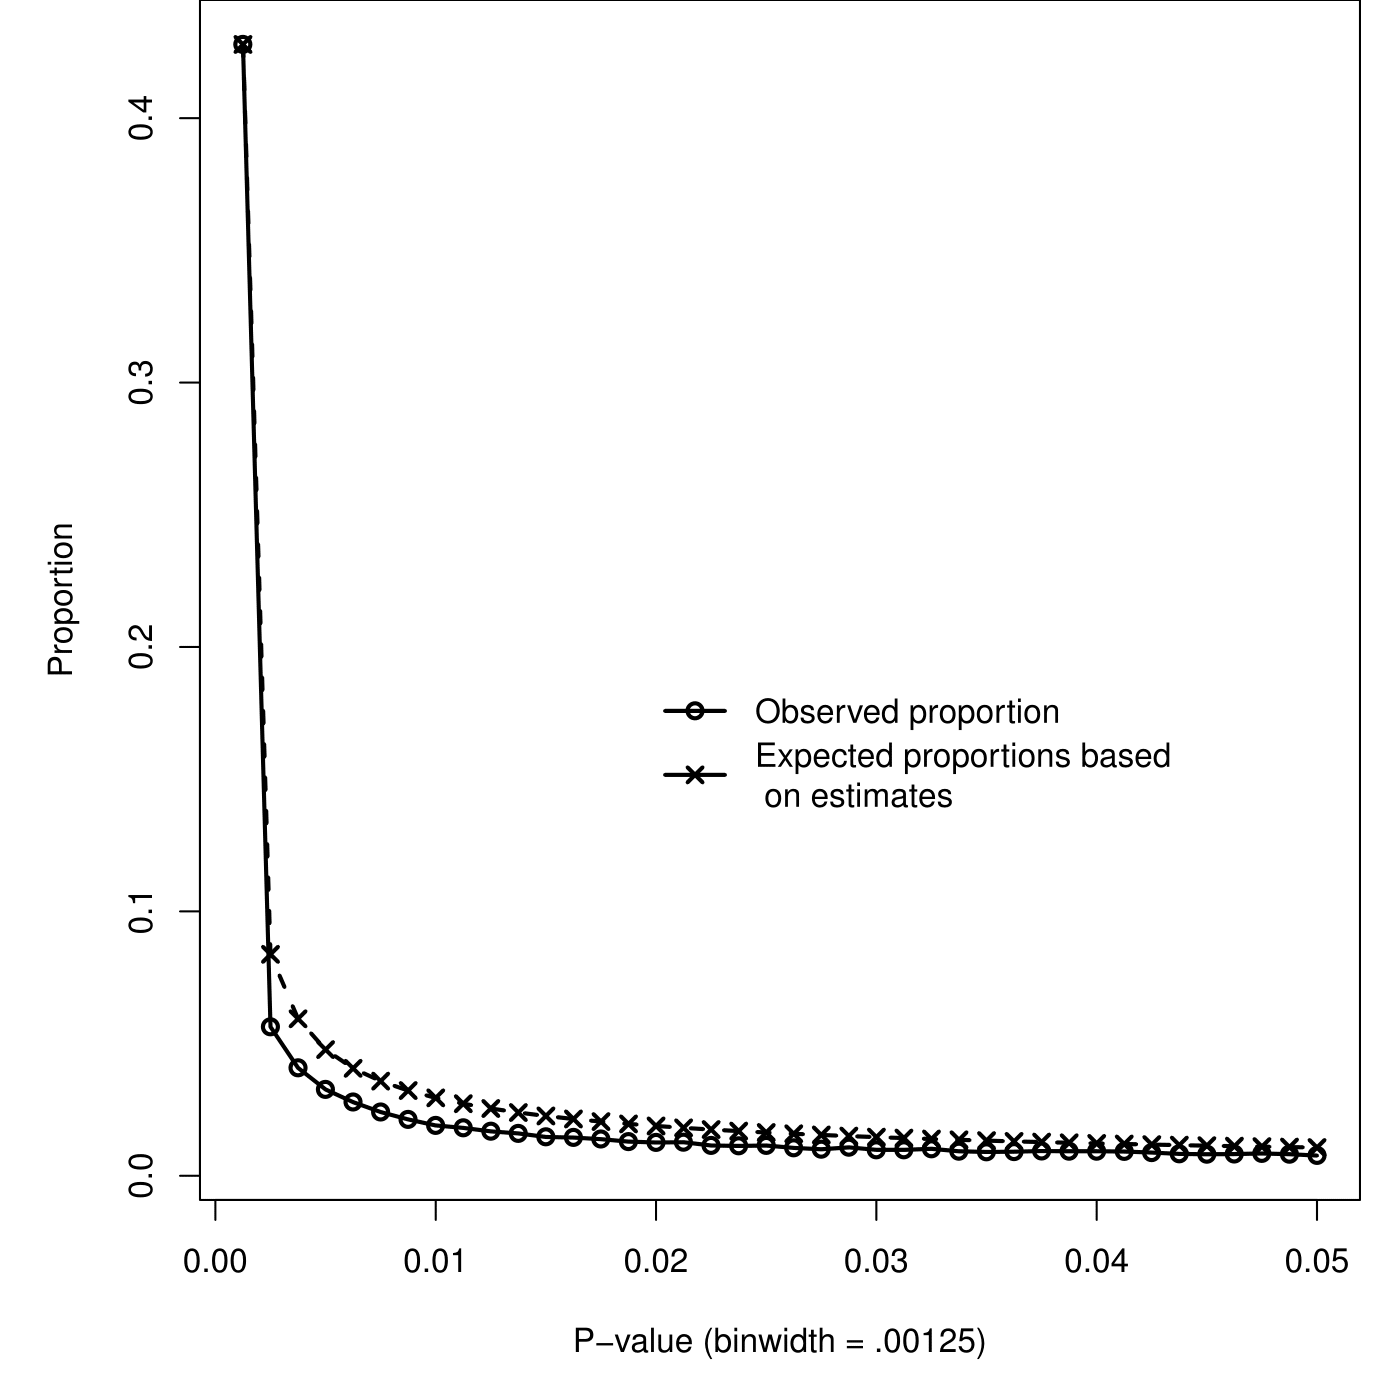 Observed proportions of $p$-values (circles) and expected proportions of $p$-values based on estimated $\hat{\rho}_F$ and estimated $\hat{\tau}_{\rho_F}$ estimated from 0-.00125 (crosses).